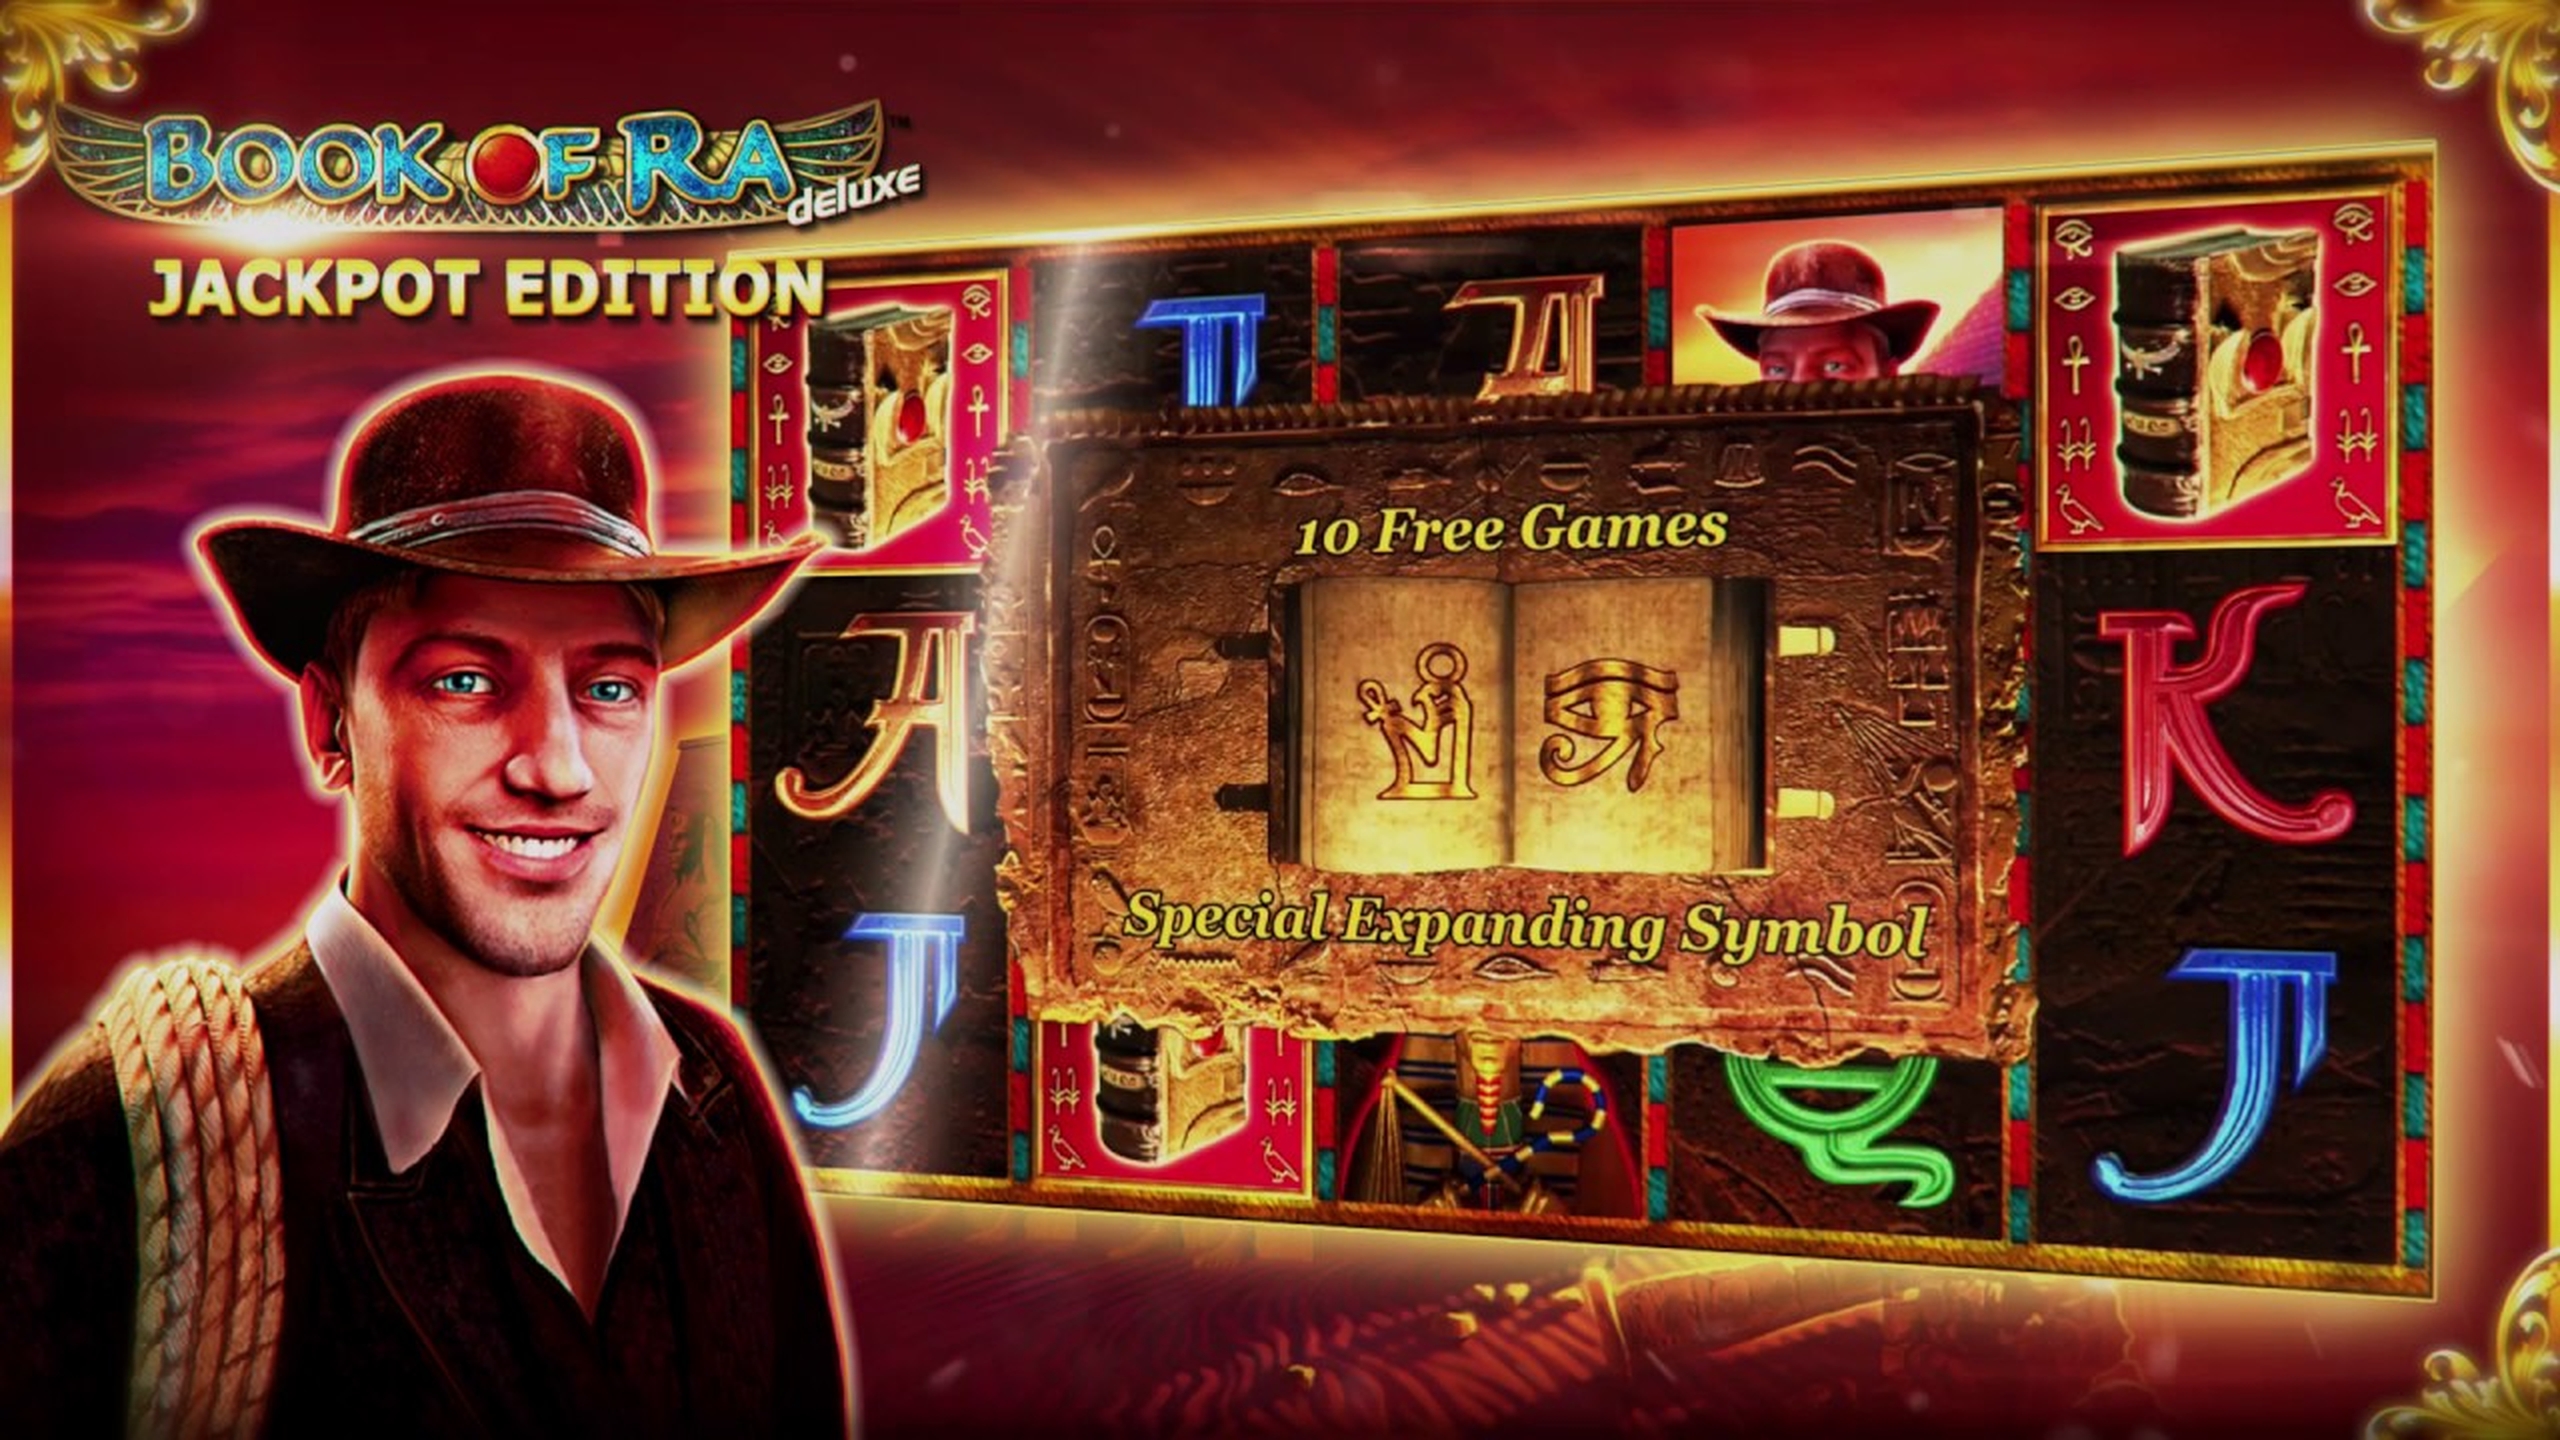 Book of Ra Deluxe Jackpot Edition